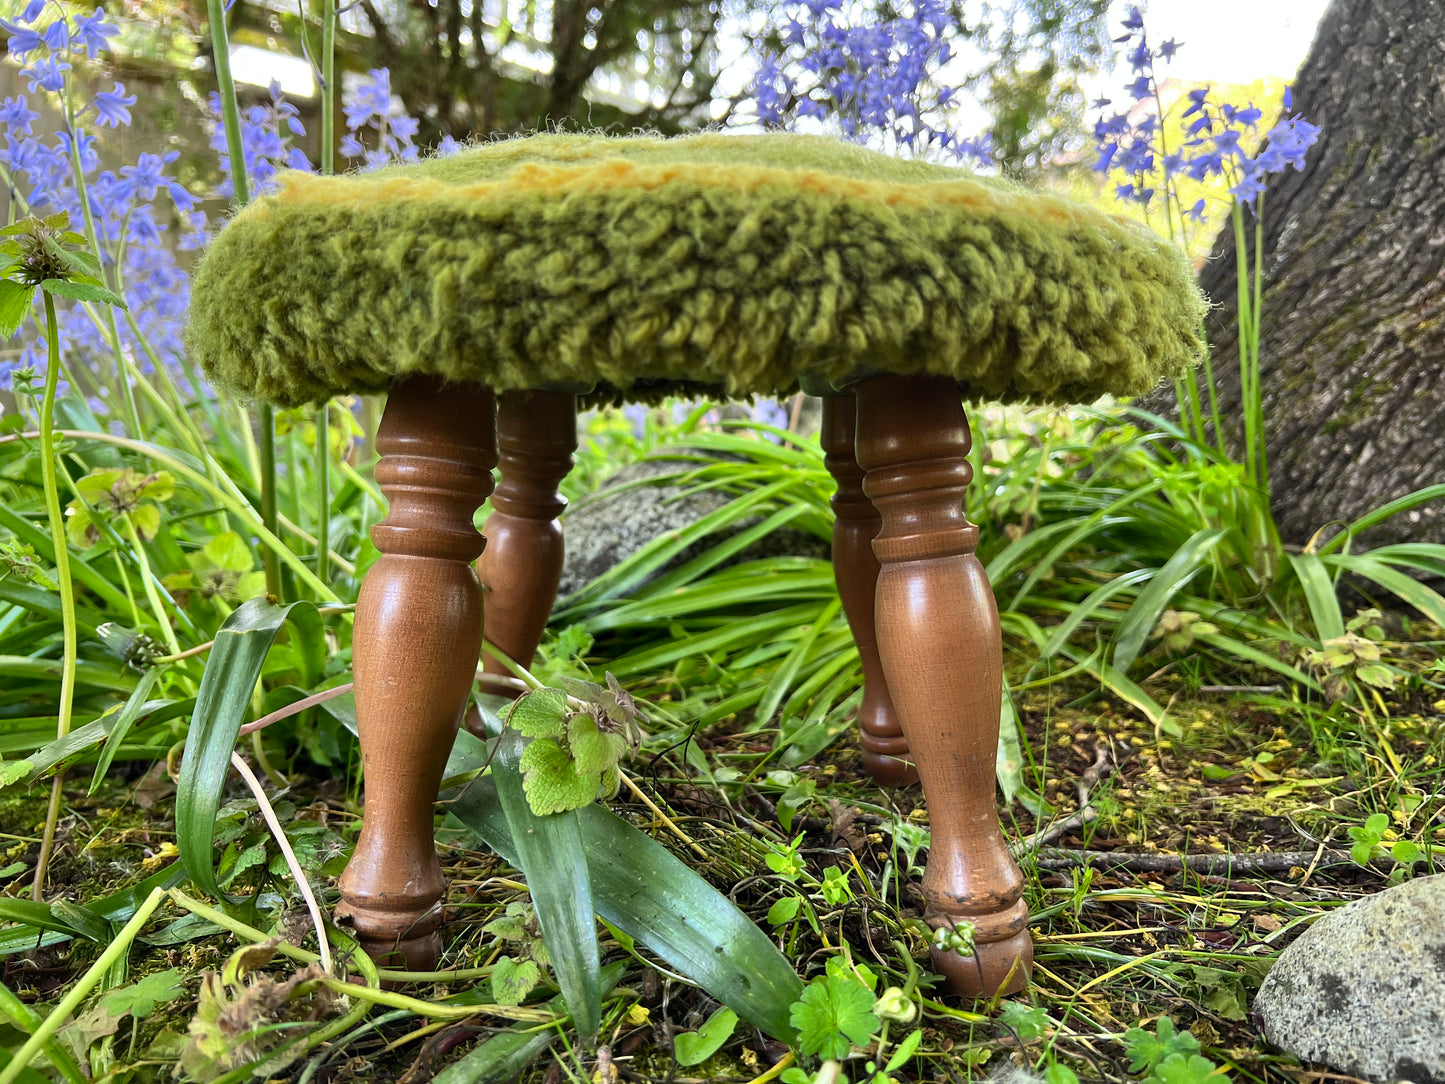 The Far Out Fuzzy Footstool